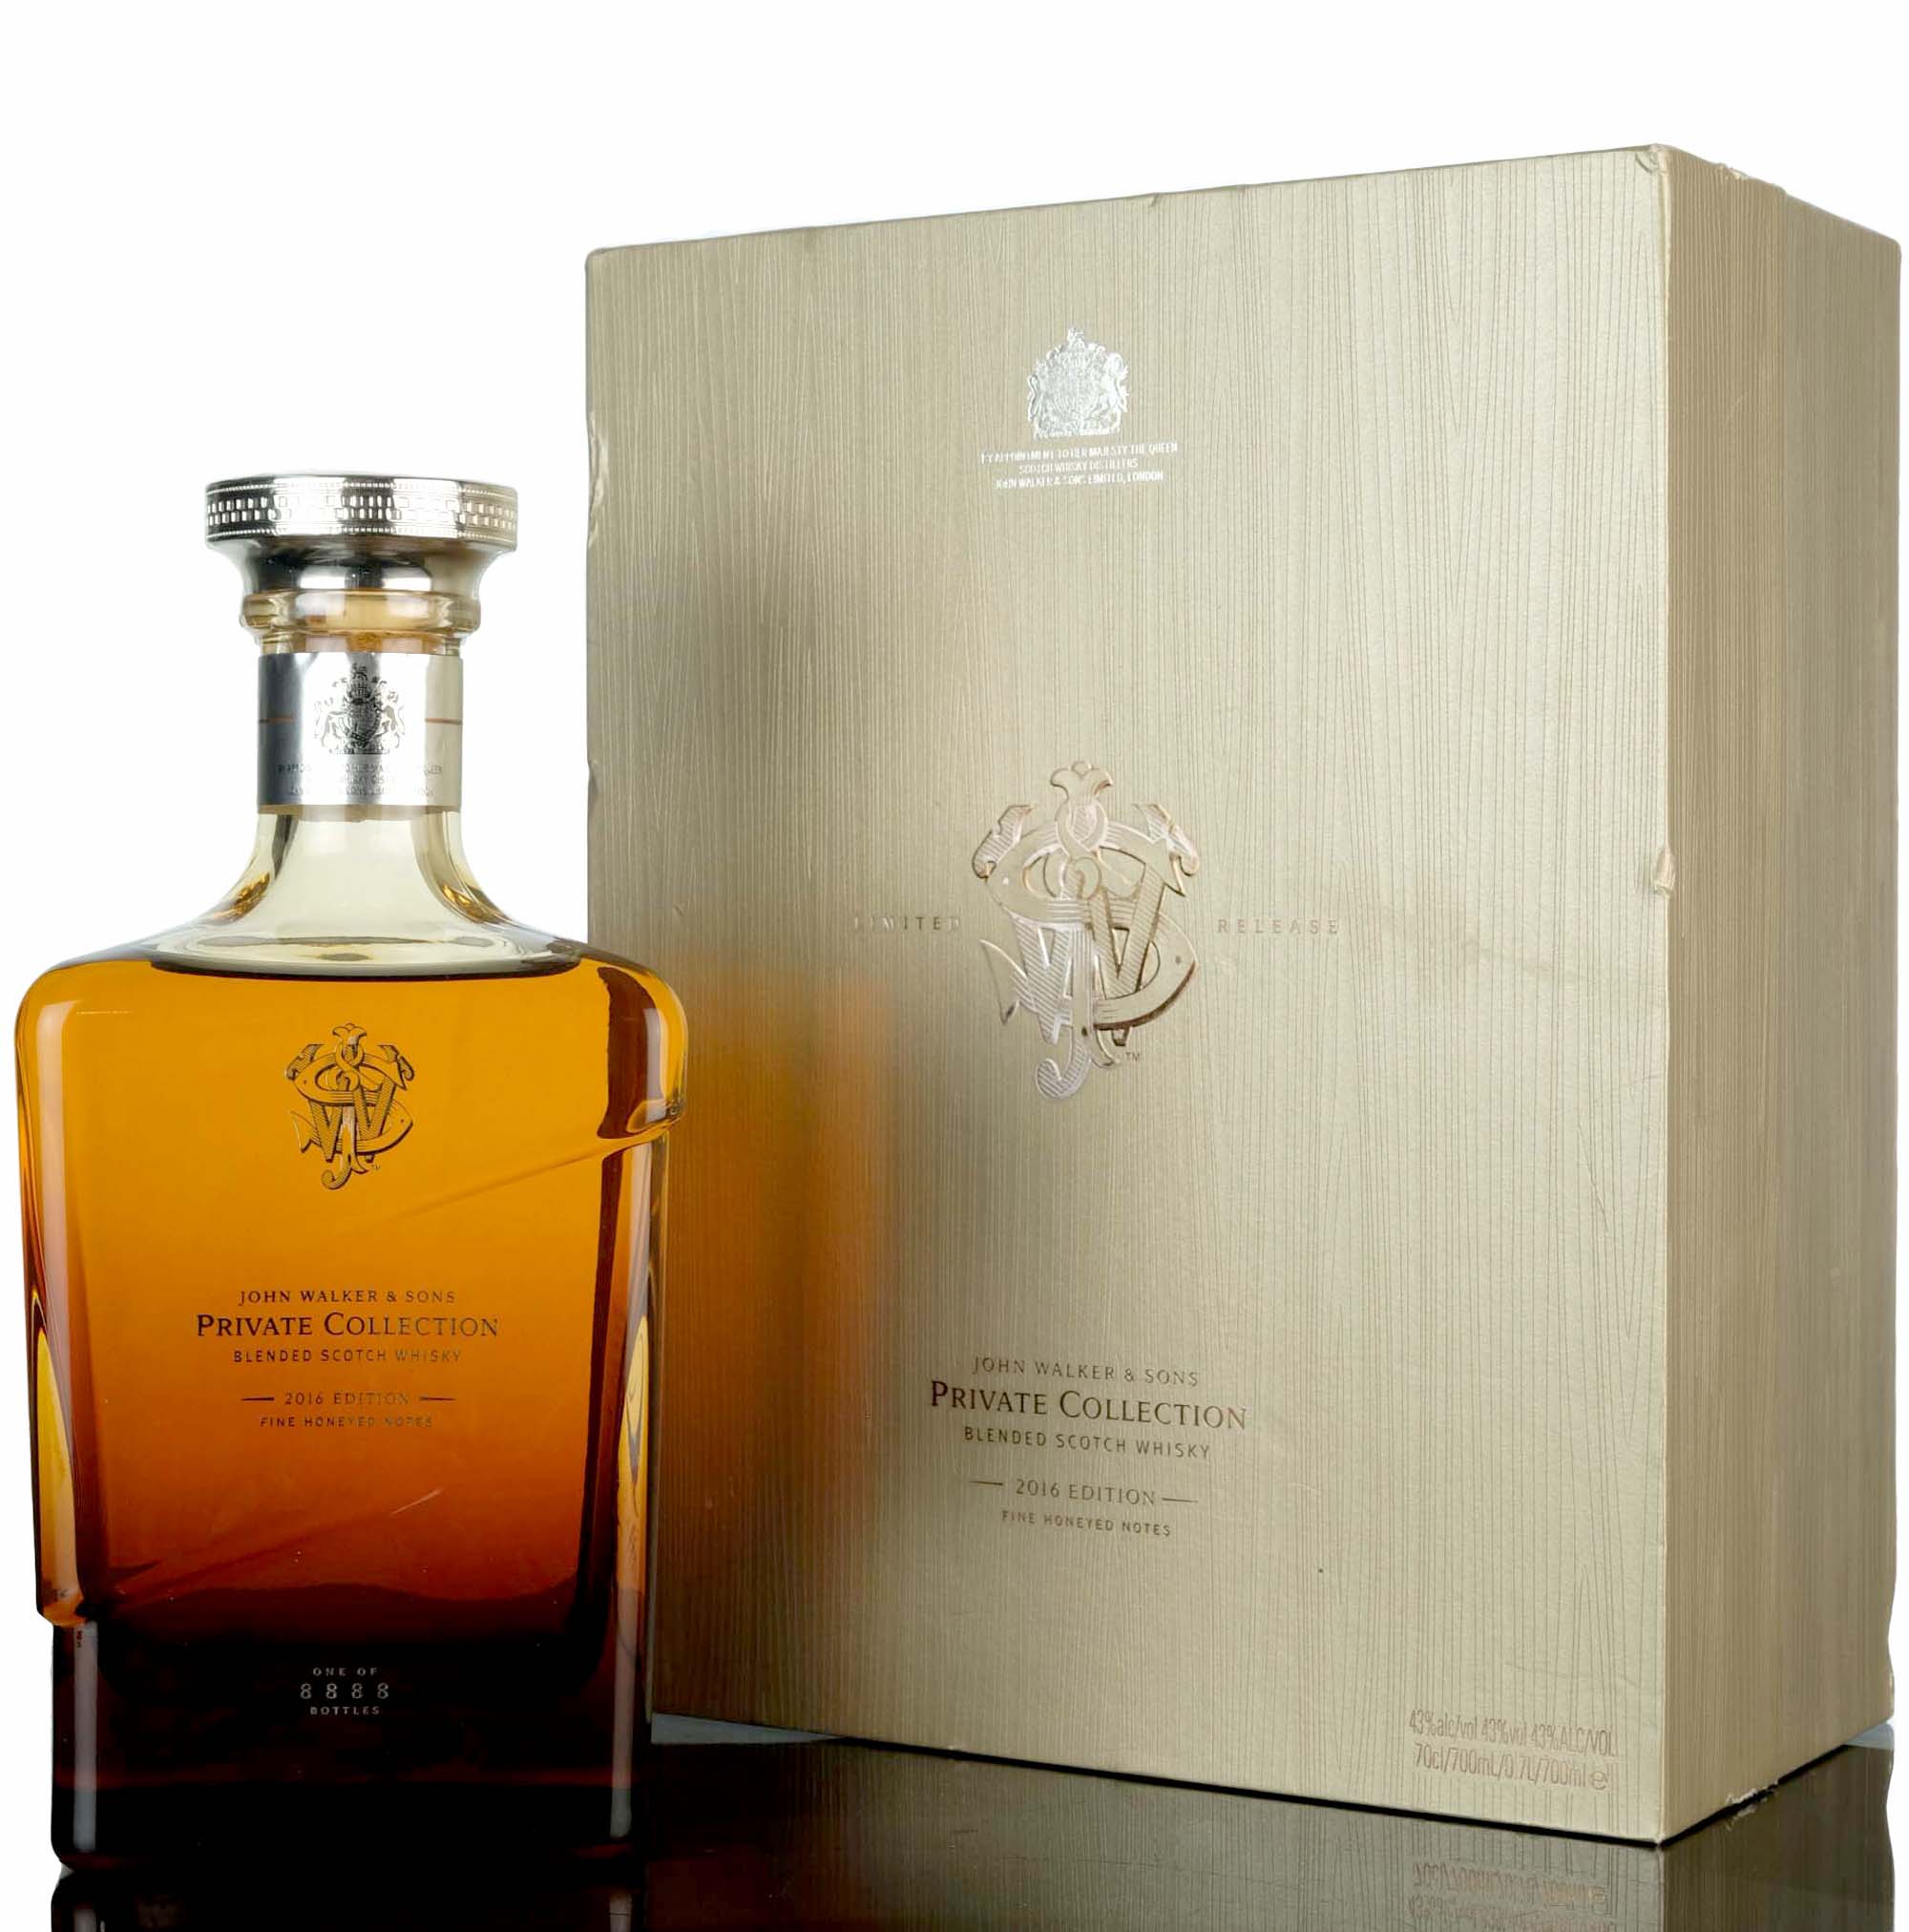 Johnnie Walker Private Collection 2016 Edition